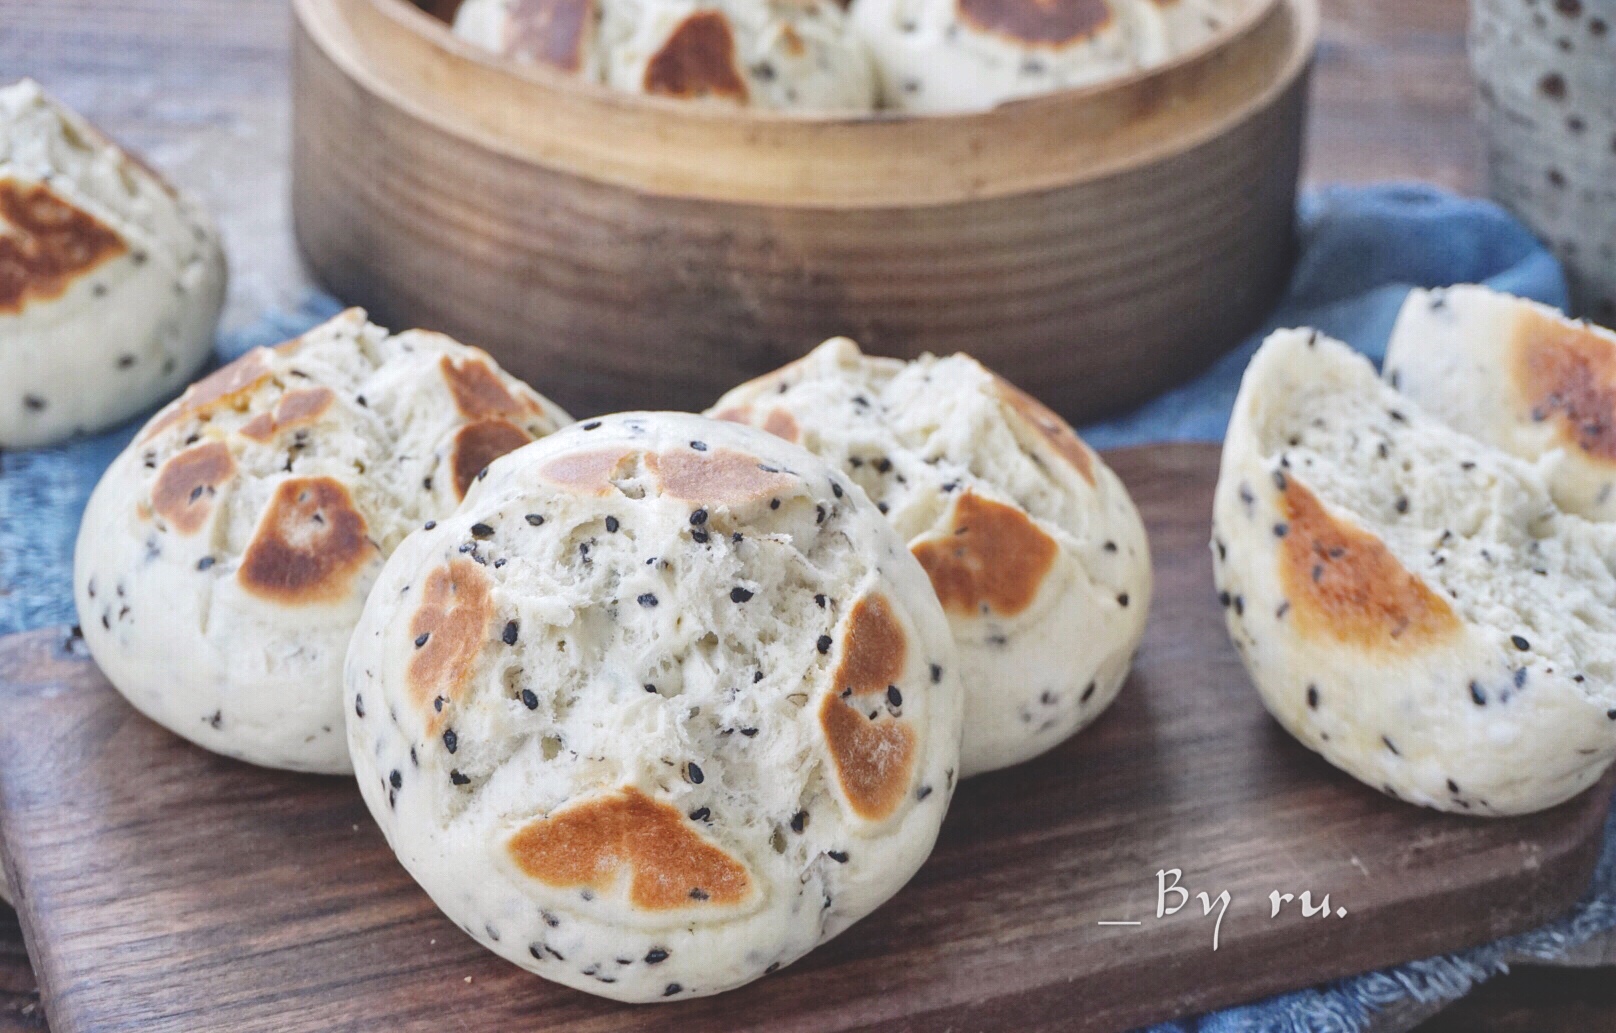 
Black sesame seed blossoms the practice of the steamed bread, how to do delicious